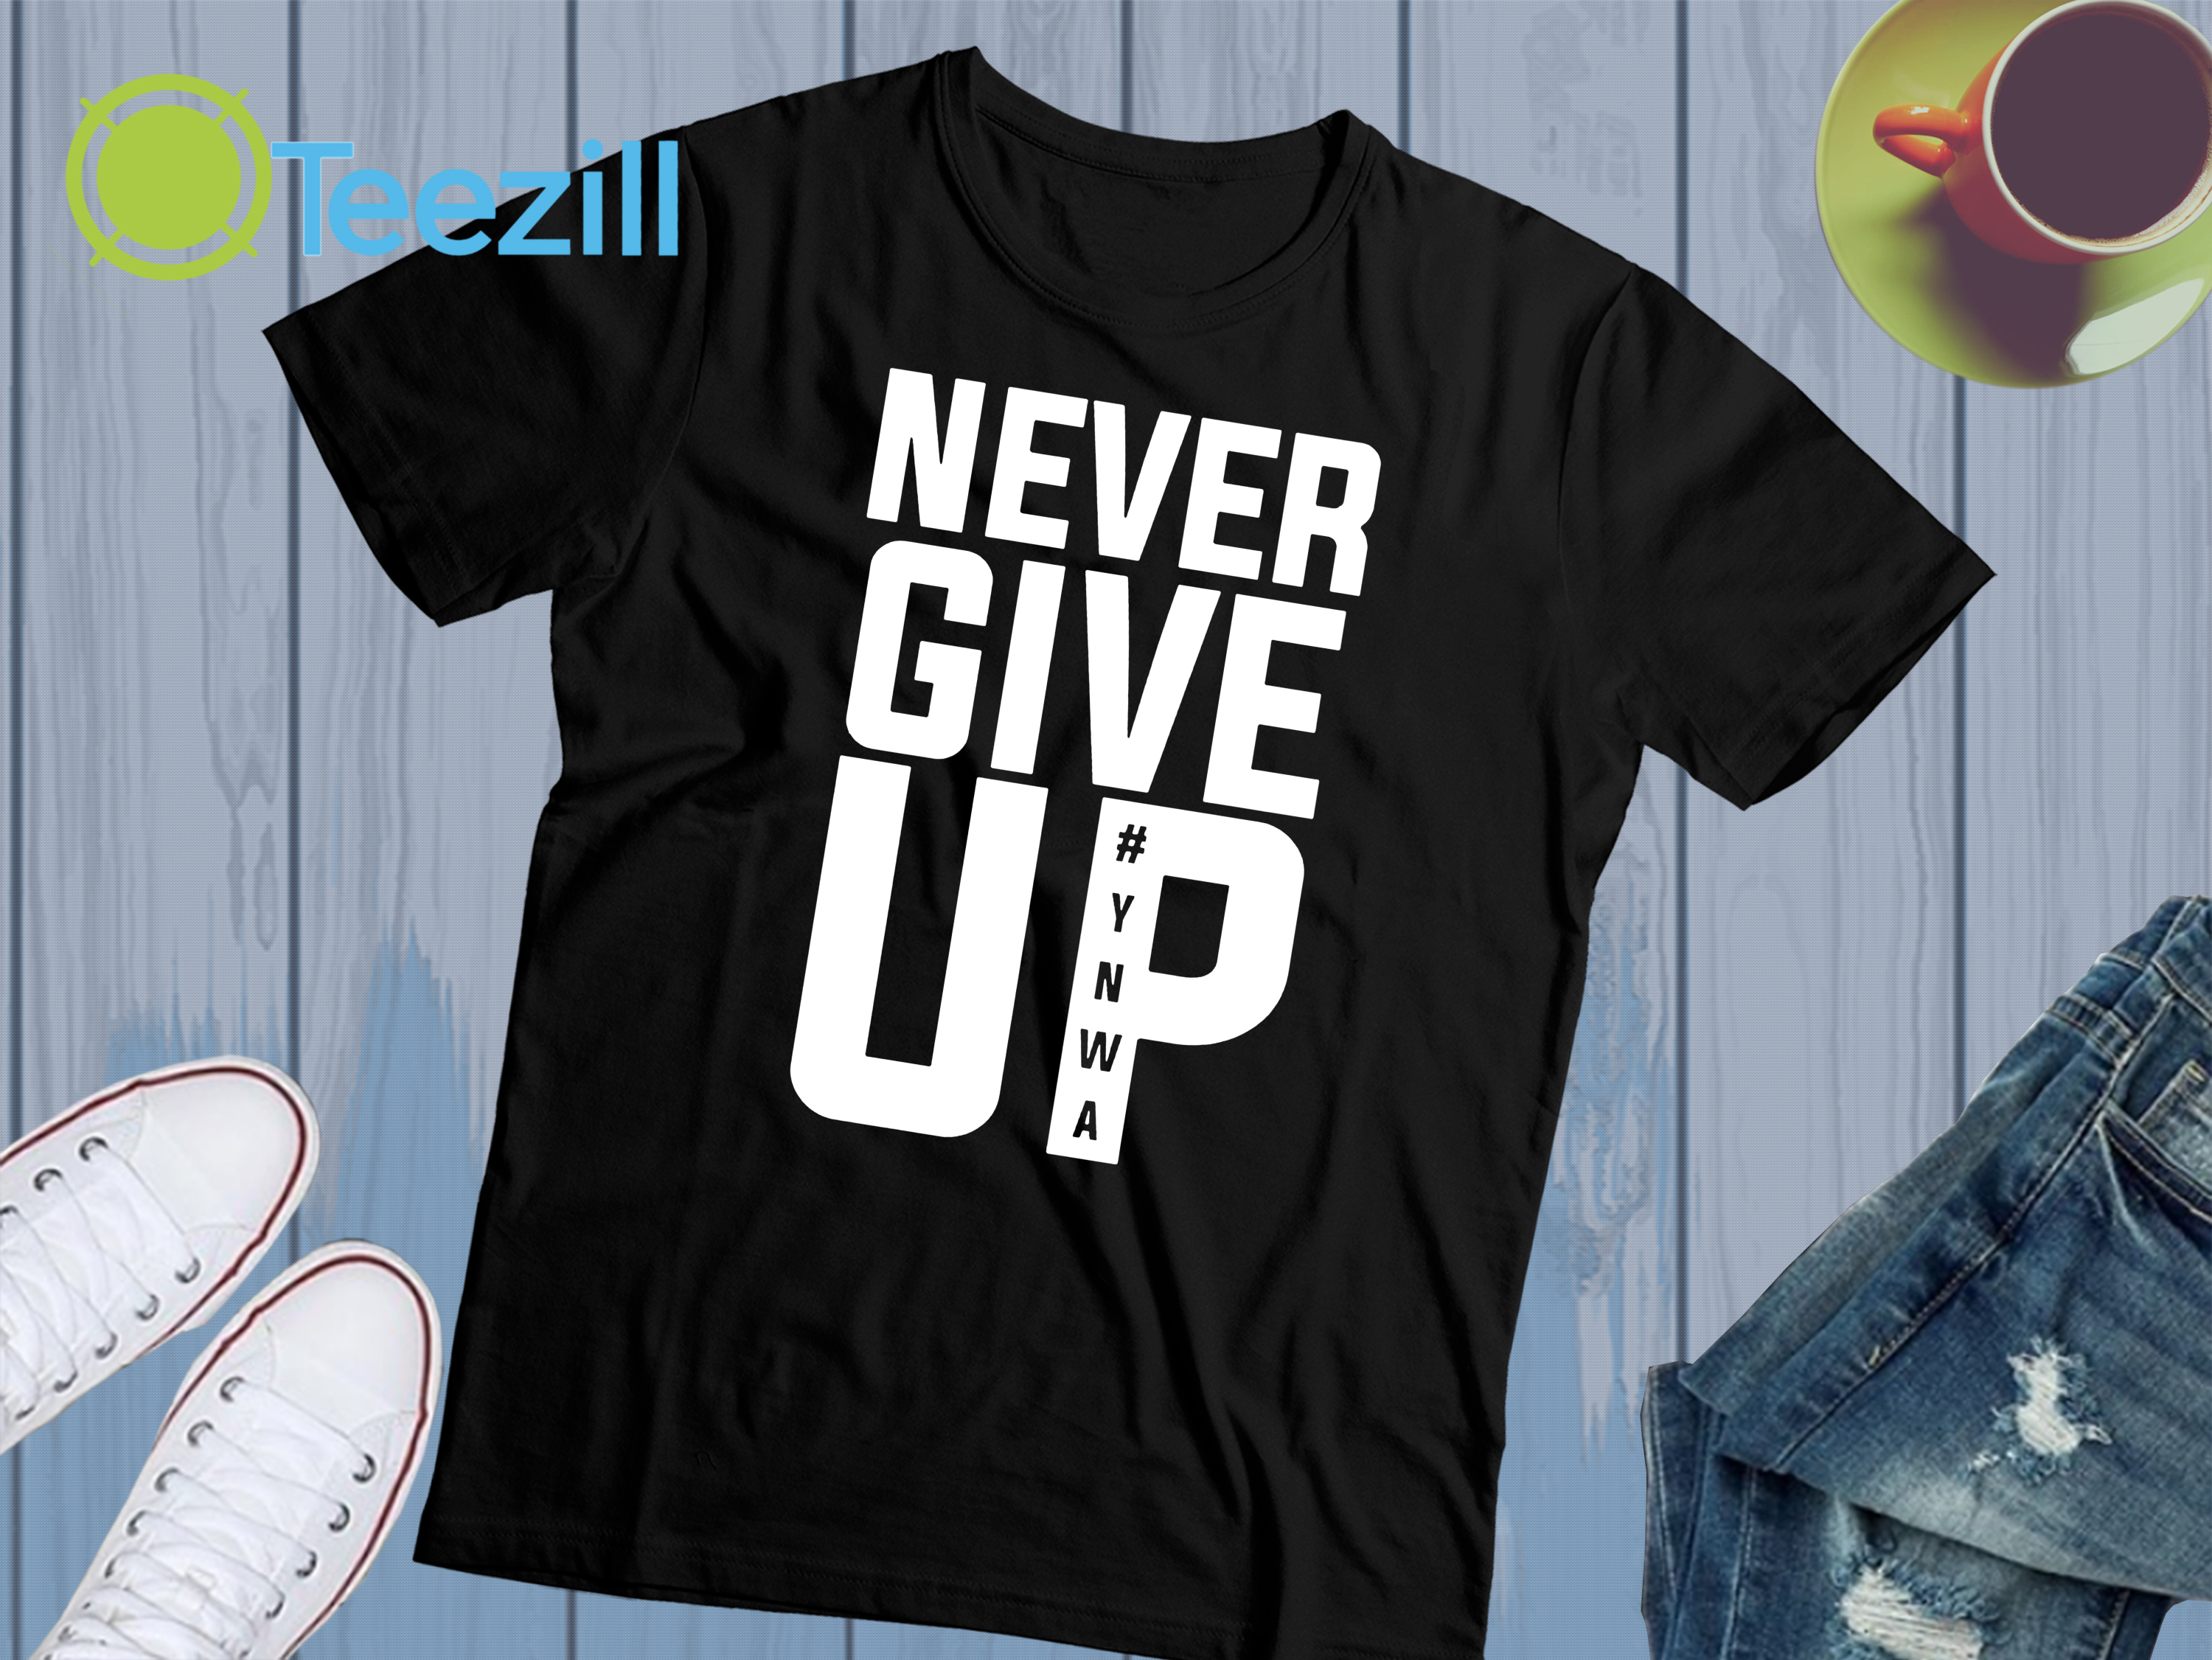 Never Give Up #YNWA Liverpool Champions League 2019 T-Shirts